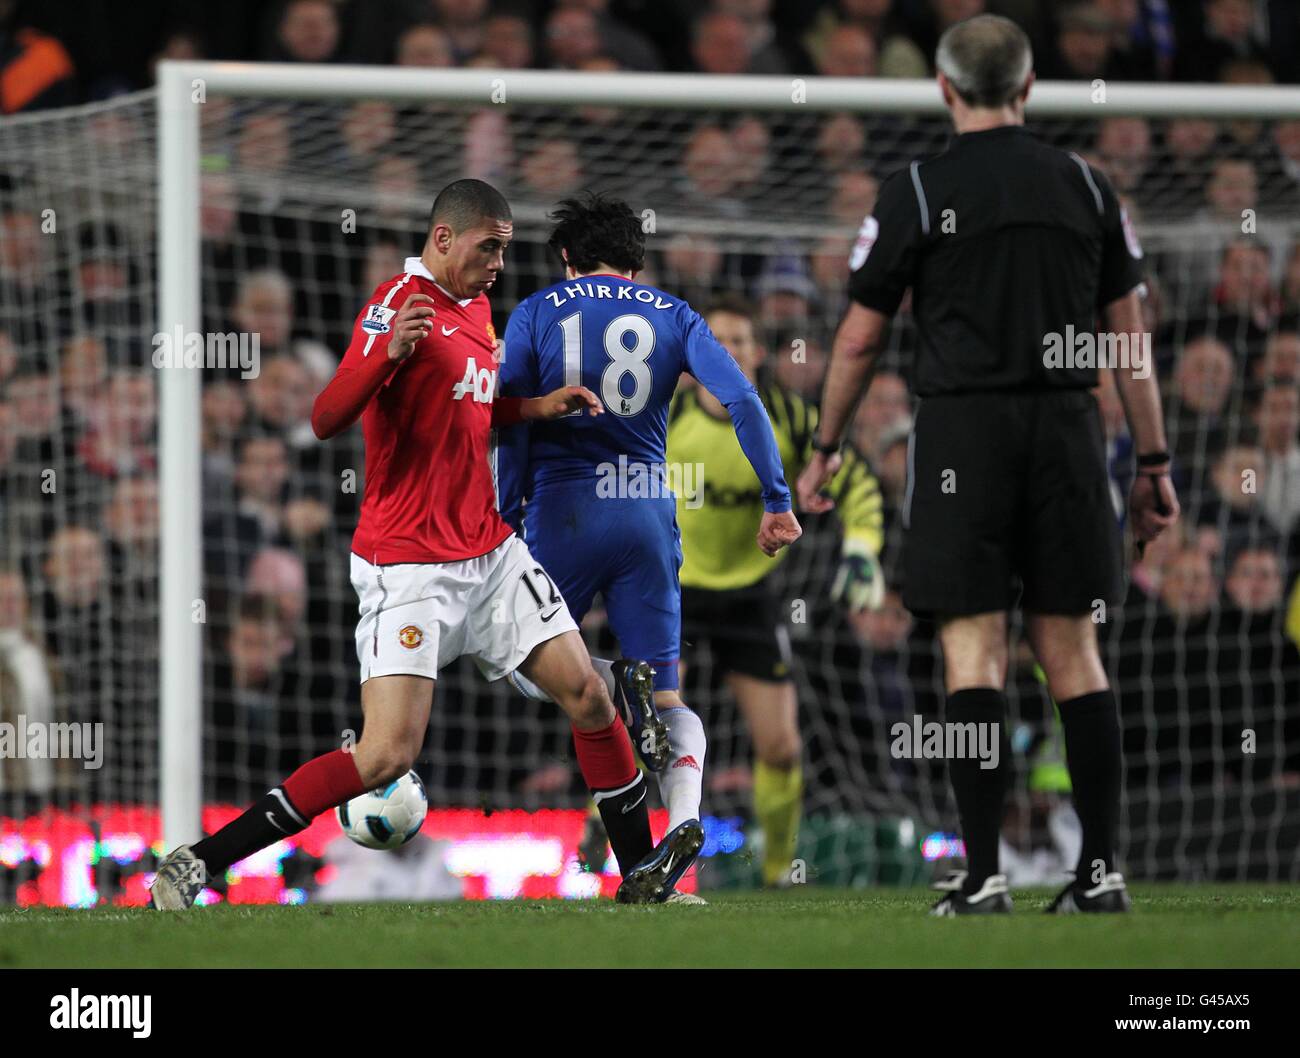 Soccer - Barclays Premier League - Chelsea v Manchester United - Stamford Bridge. Manchester United's Chris Smalling concedes a penalty for a foul on Chelseas's Yury Zhirkov Stock Photo